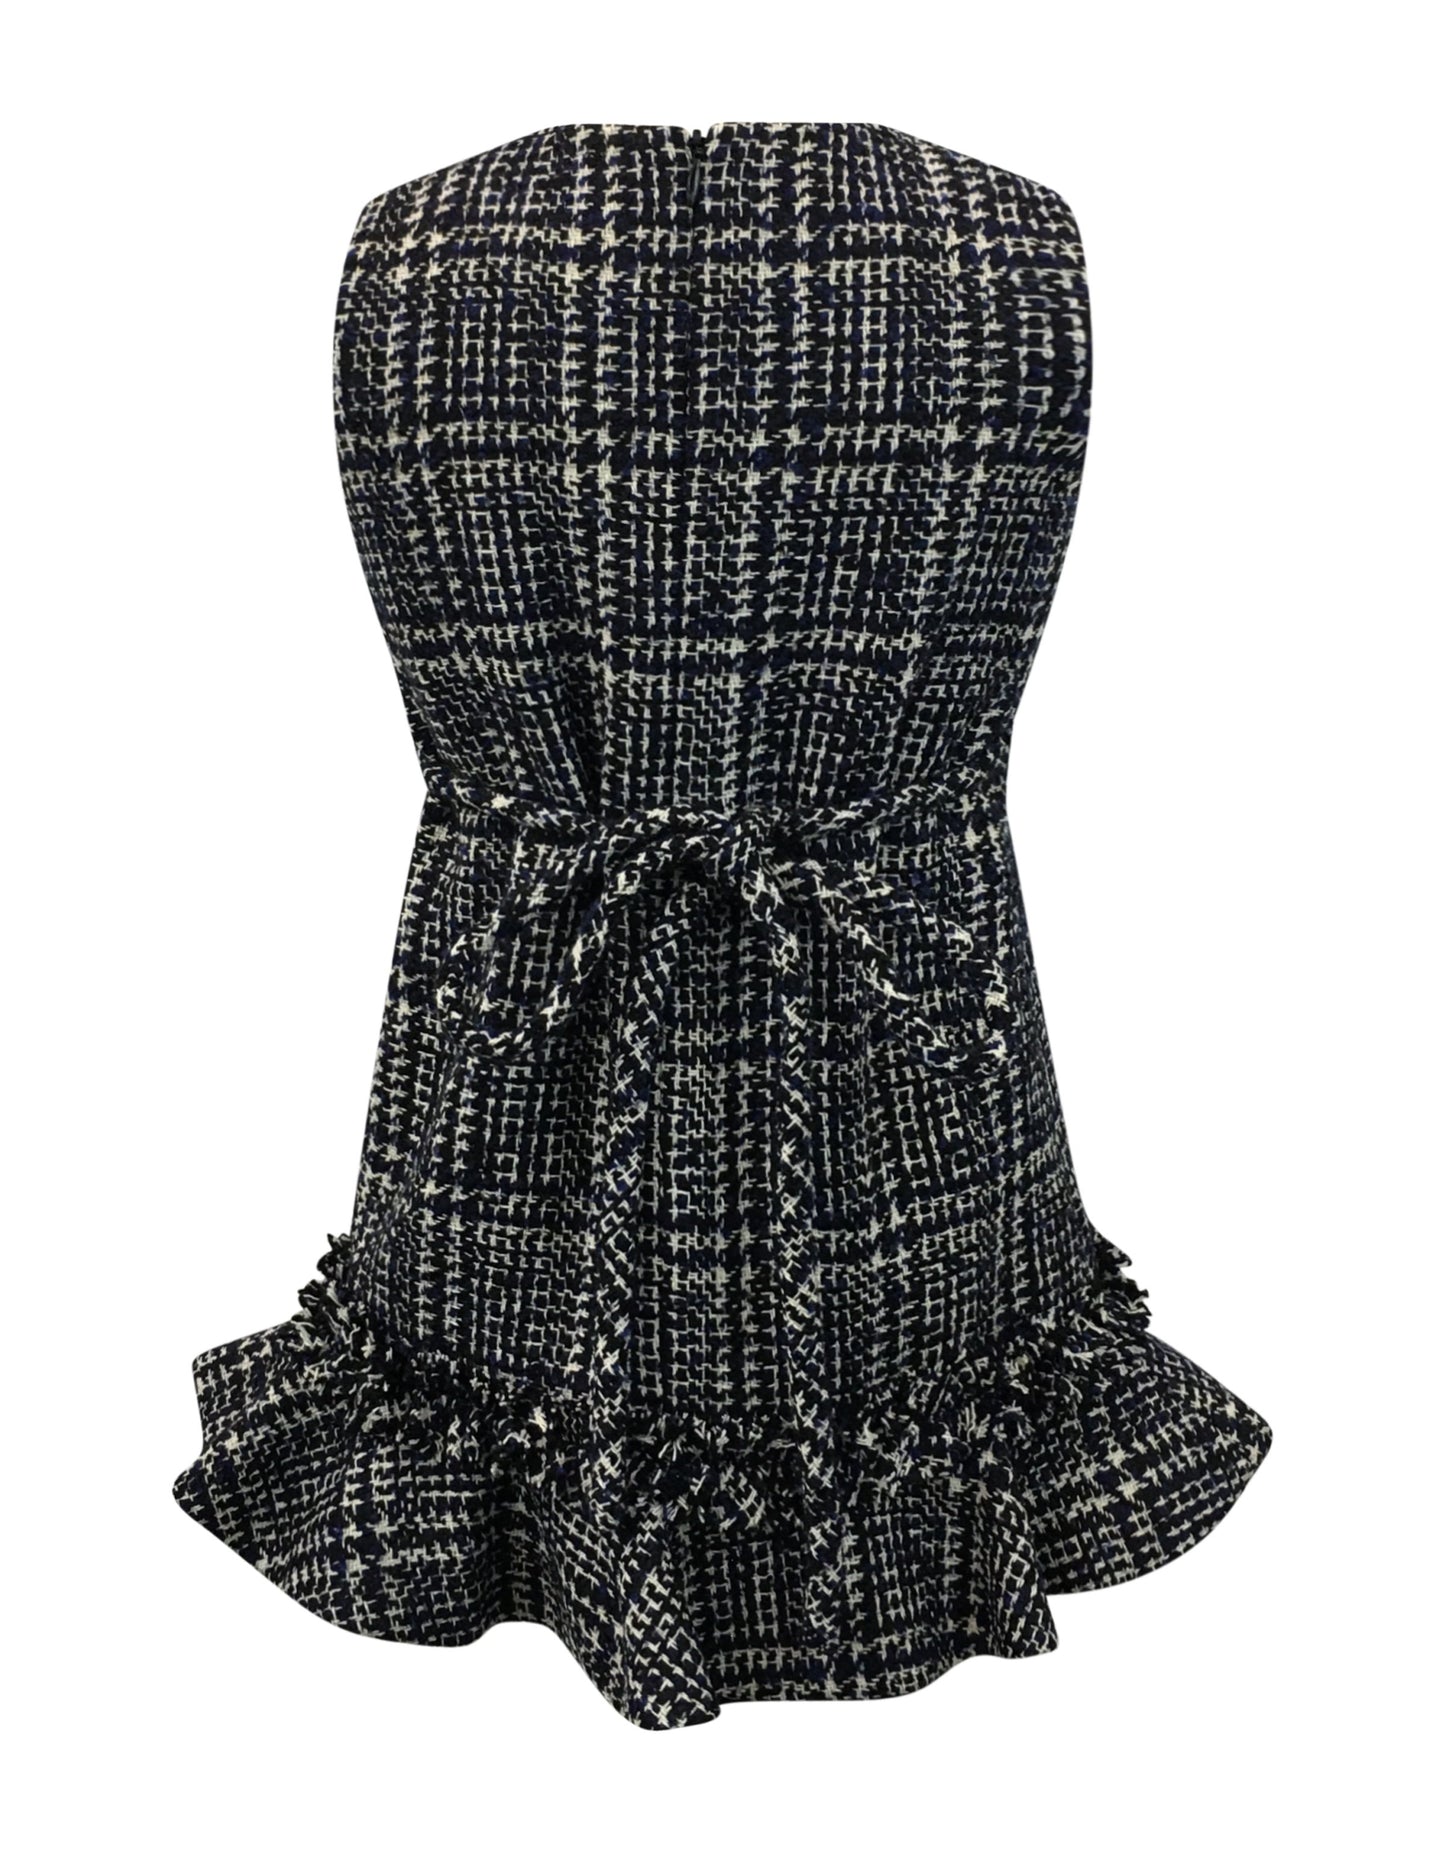 Helena and Harry Girl's Navy and Ivory Plaid Tweed Dress with Ruffles